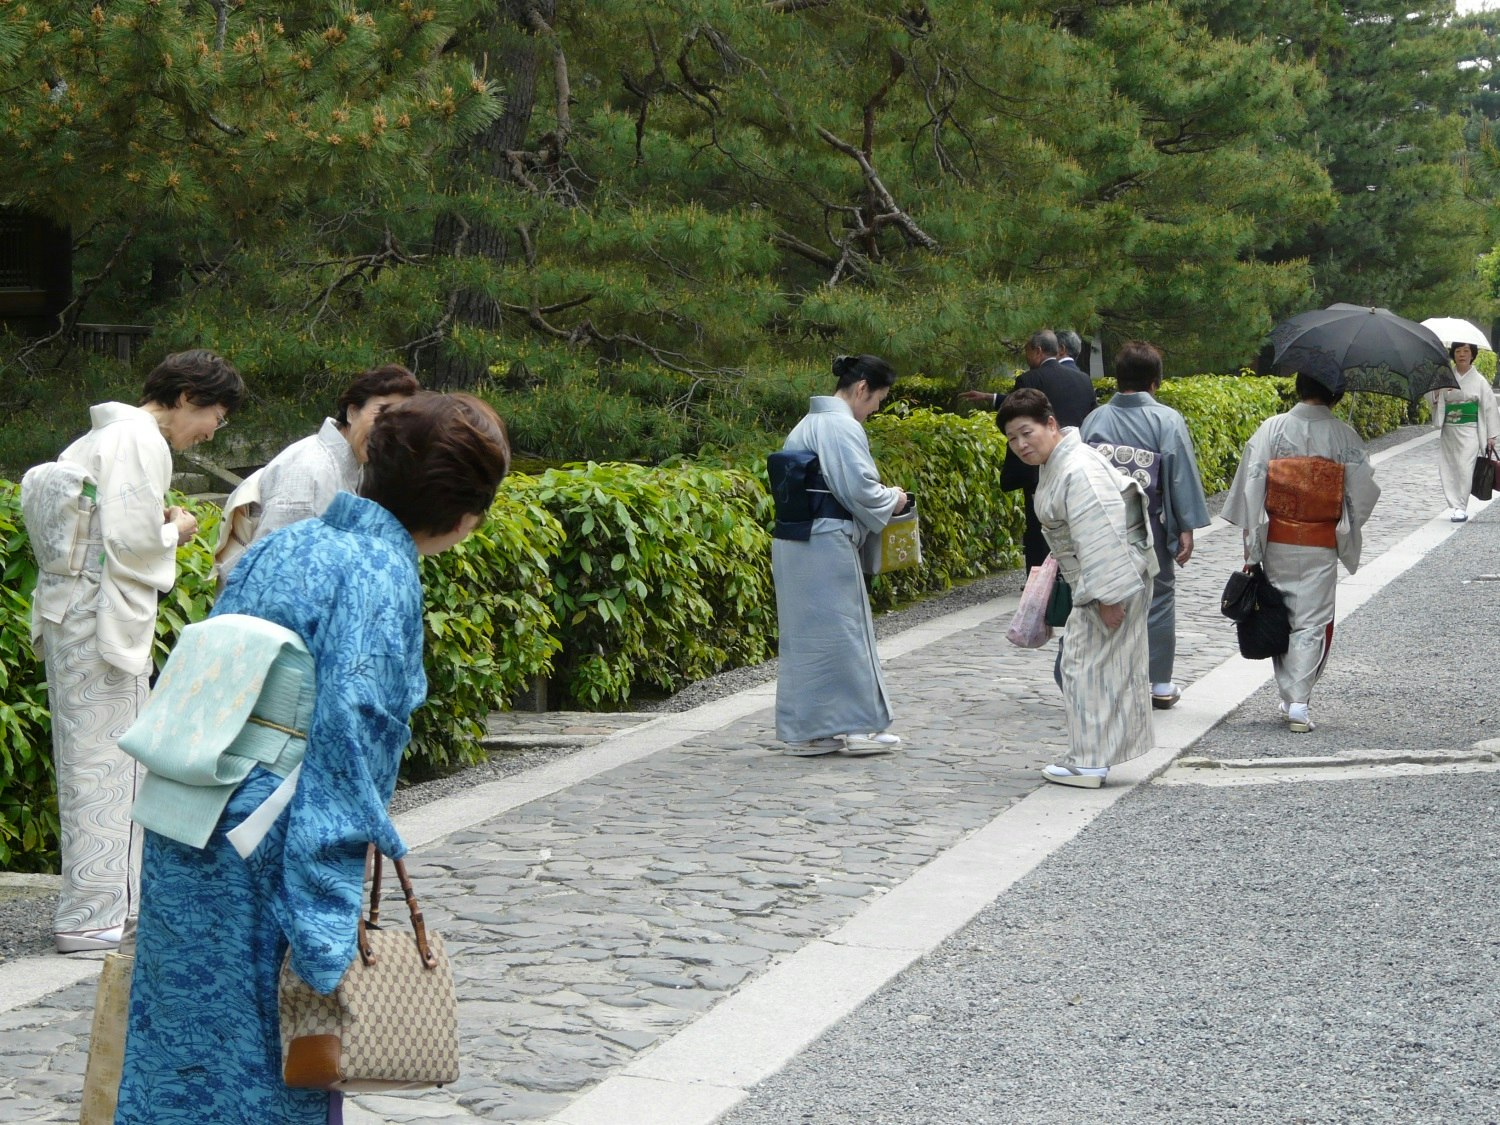 Etiquette tips for first-time travellers to Japan